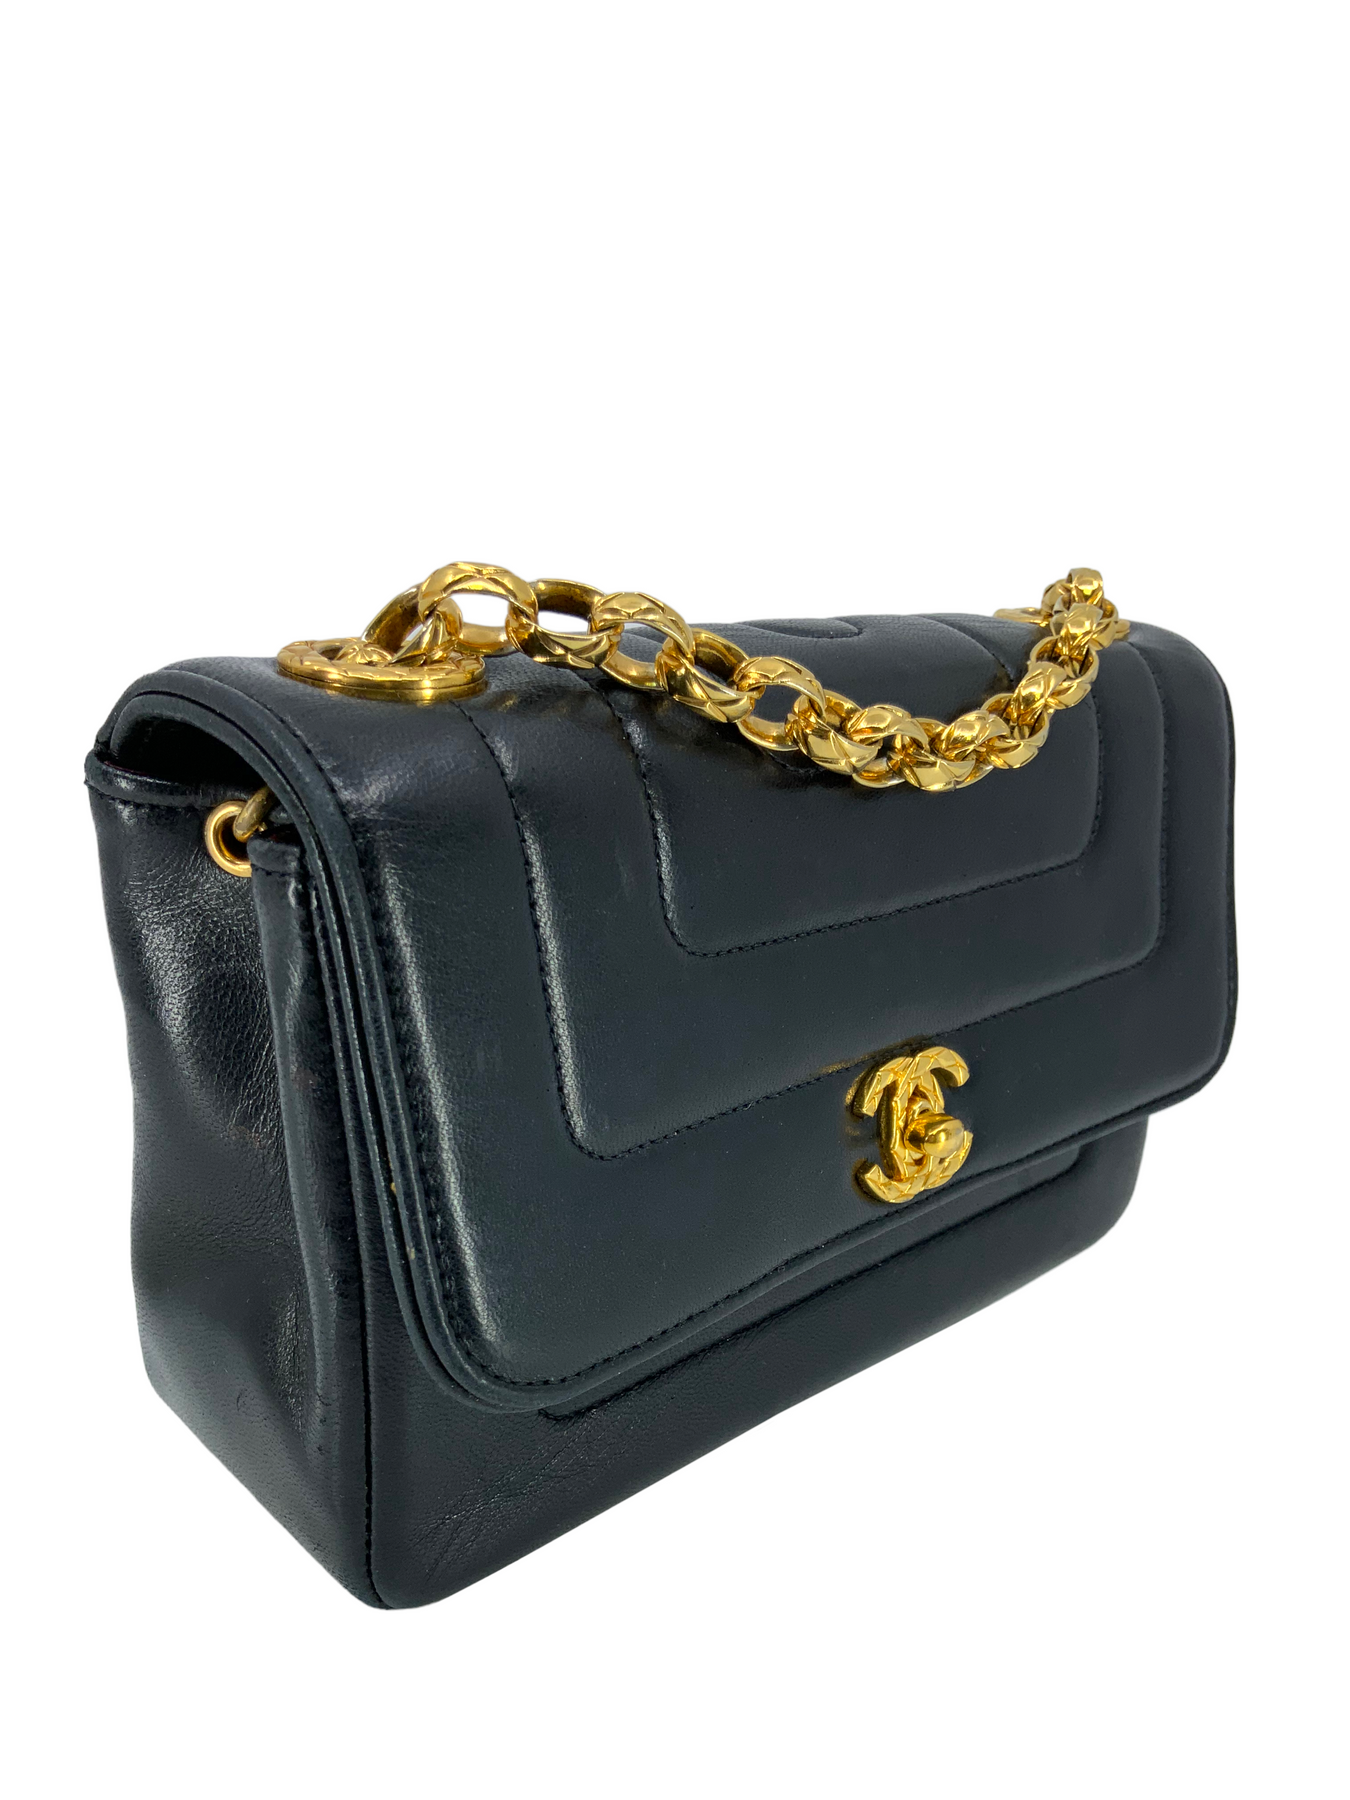 Chanel Vintage Quilted Vertical Stitch Lambskin Classic Mini Flap Bag